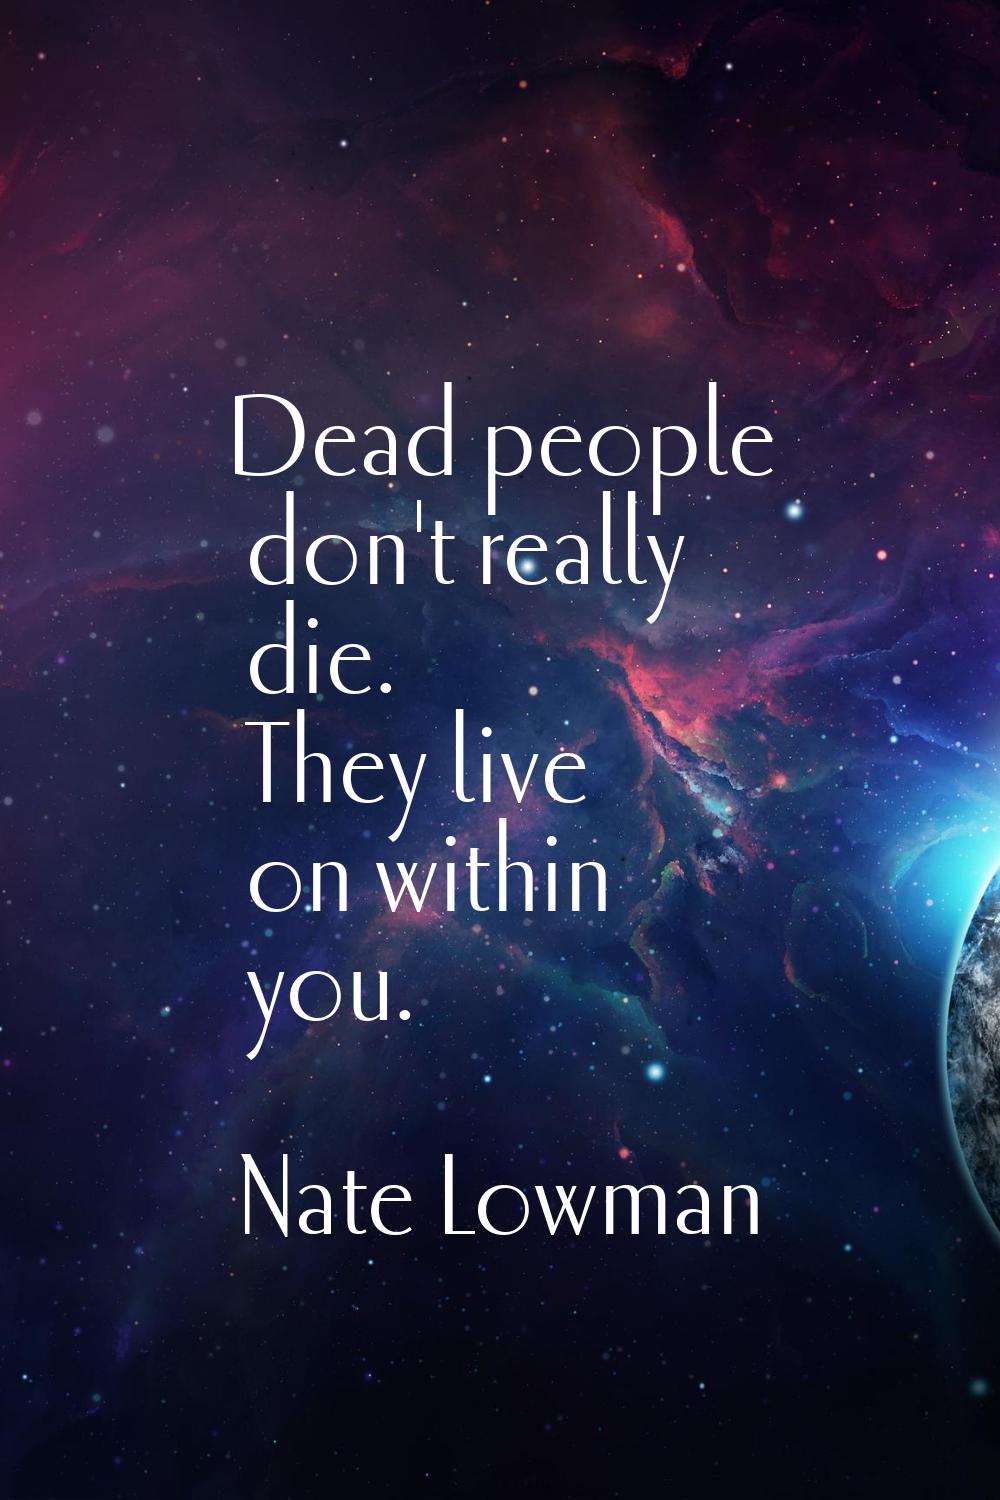 Dead people don't really die. They live on within you.